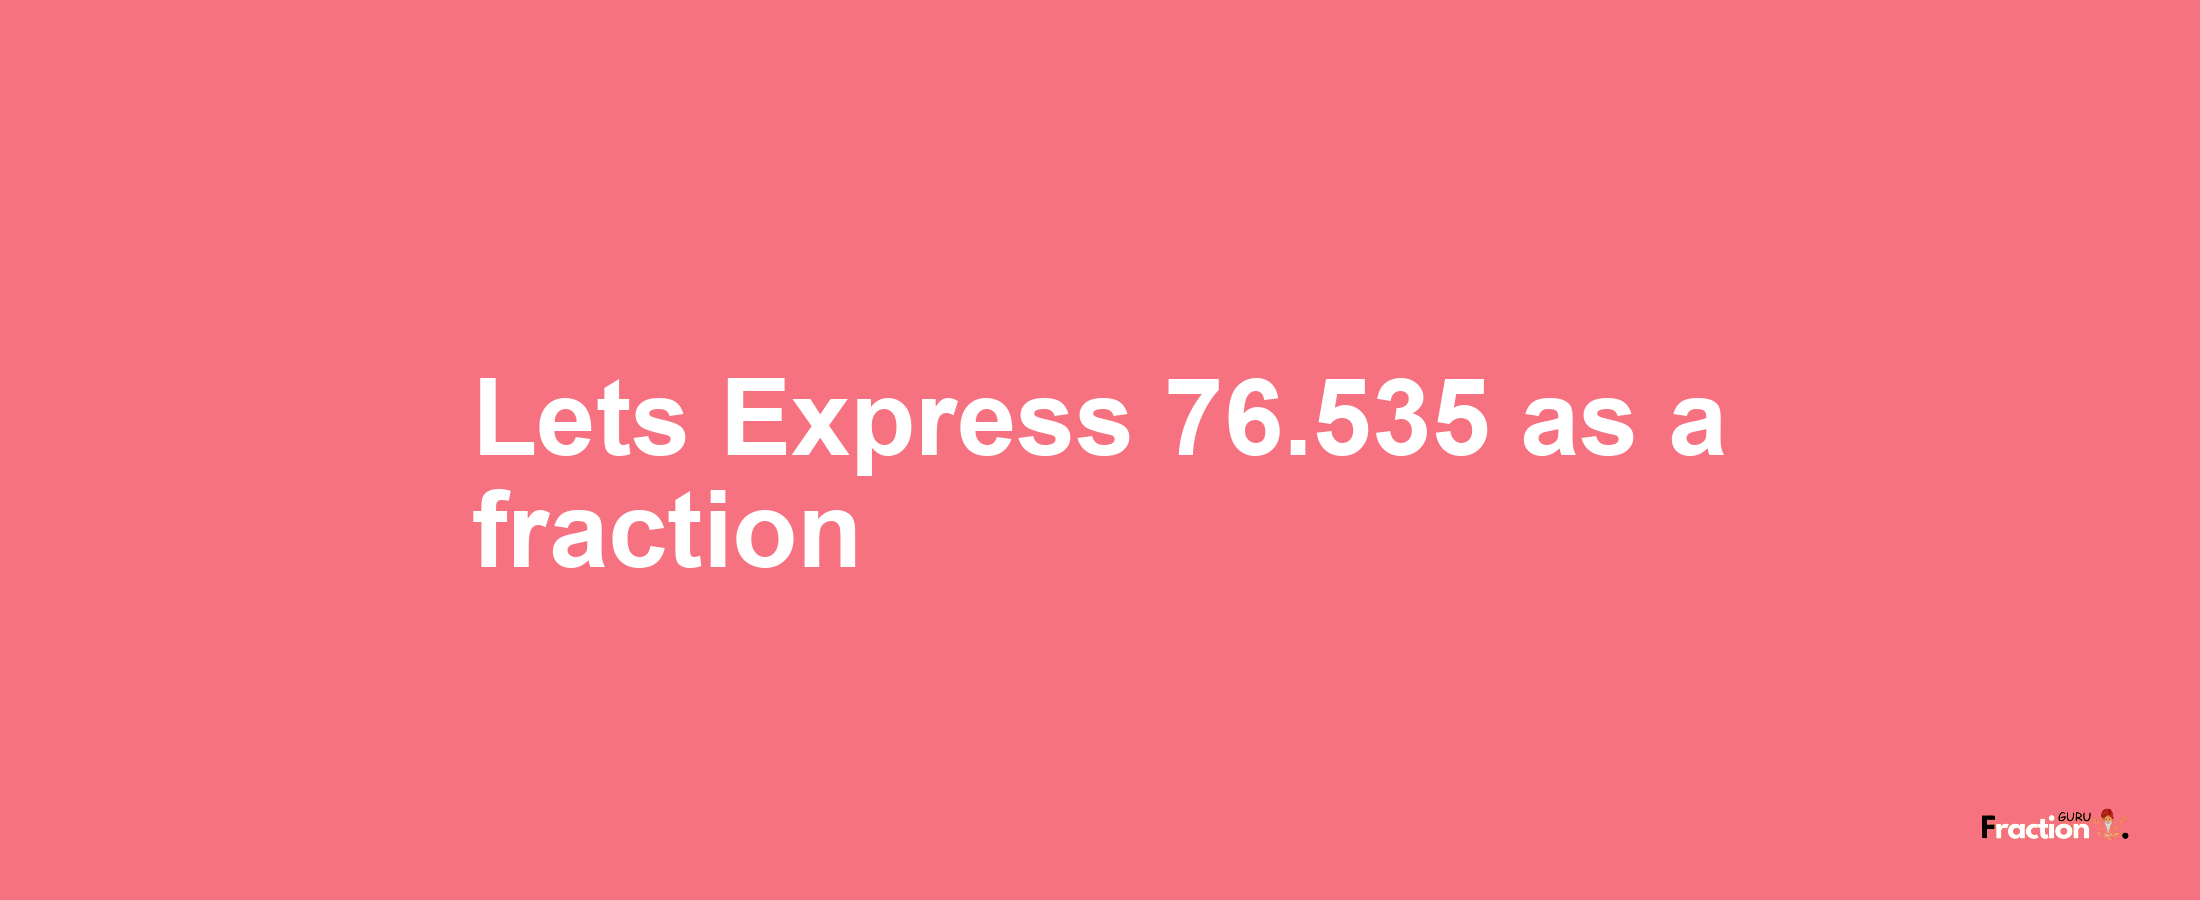 Lets Express 76.535 as afraction